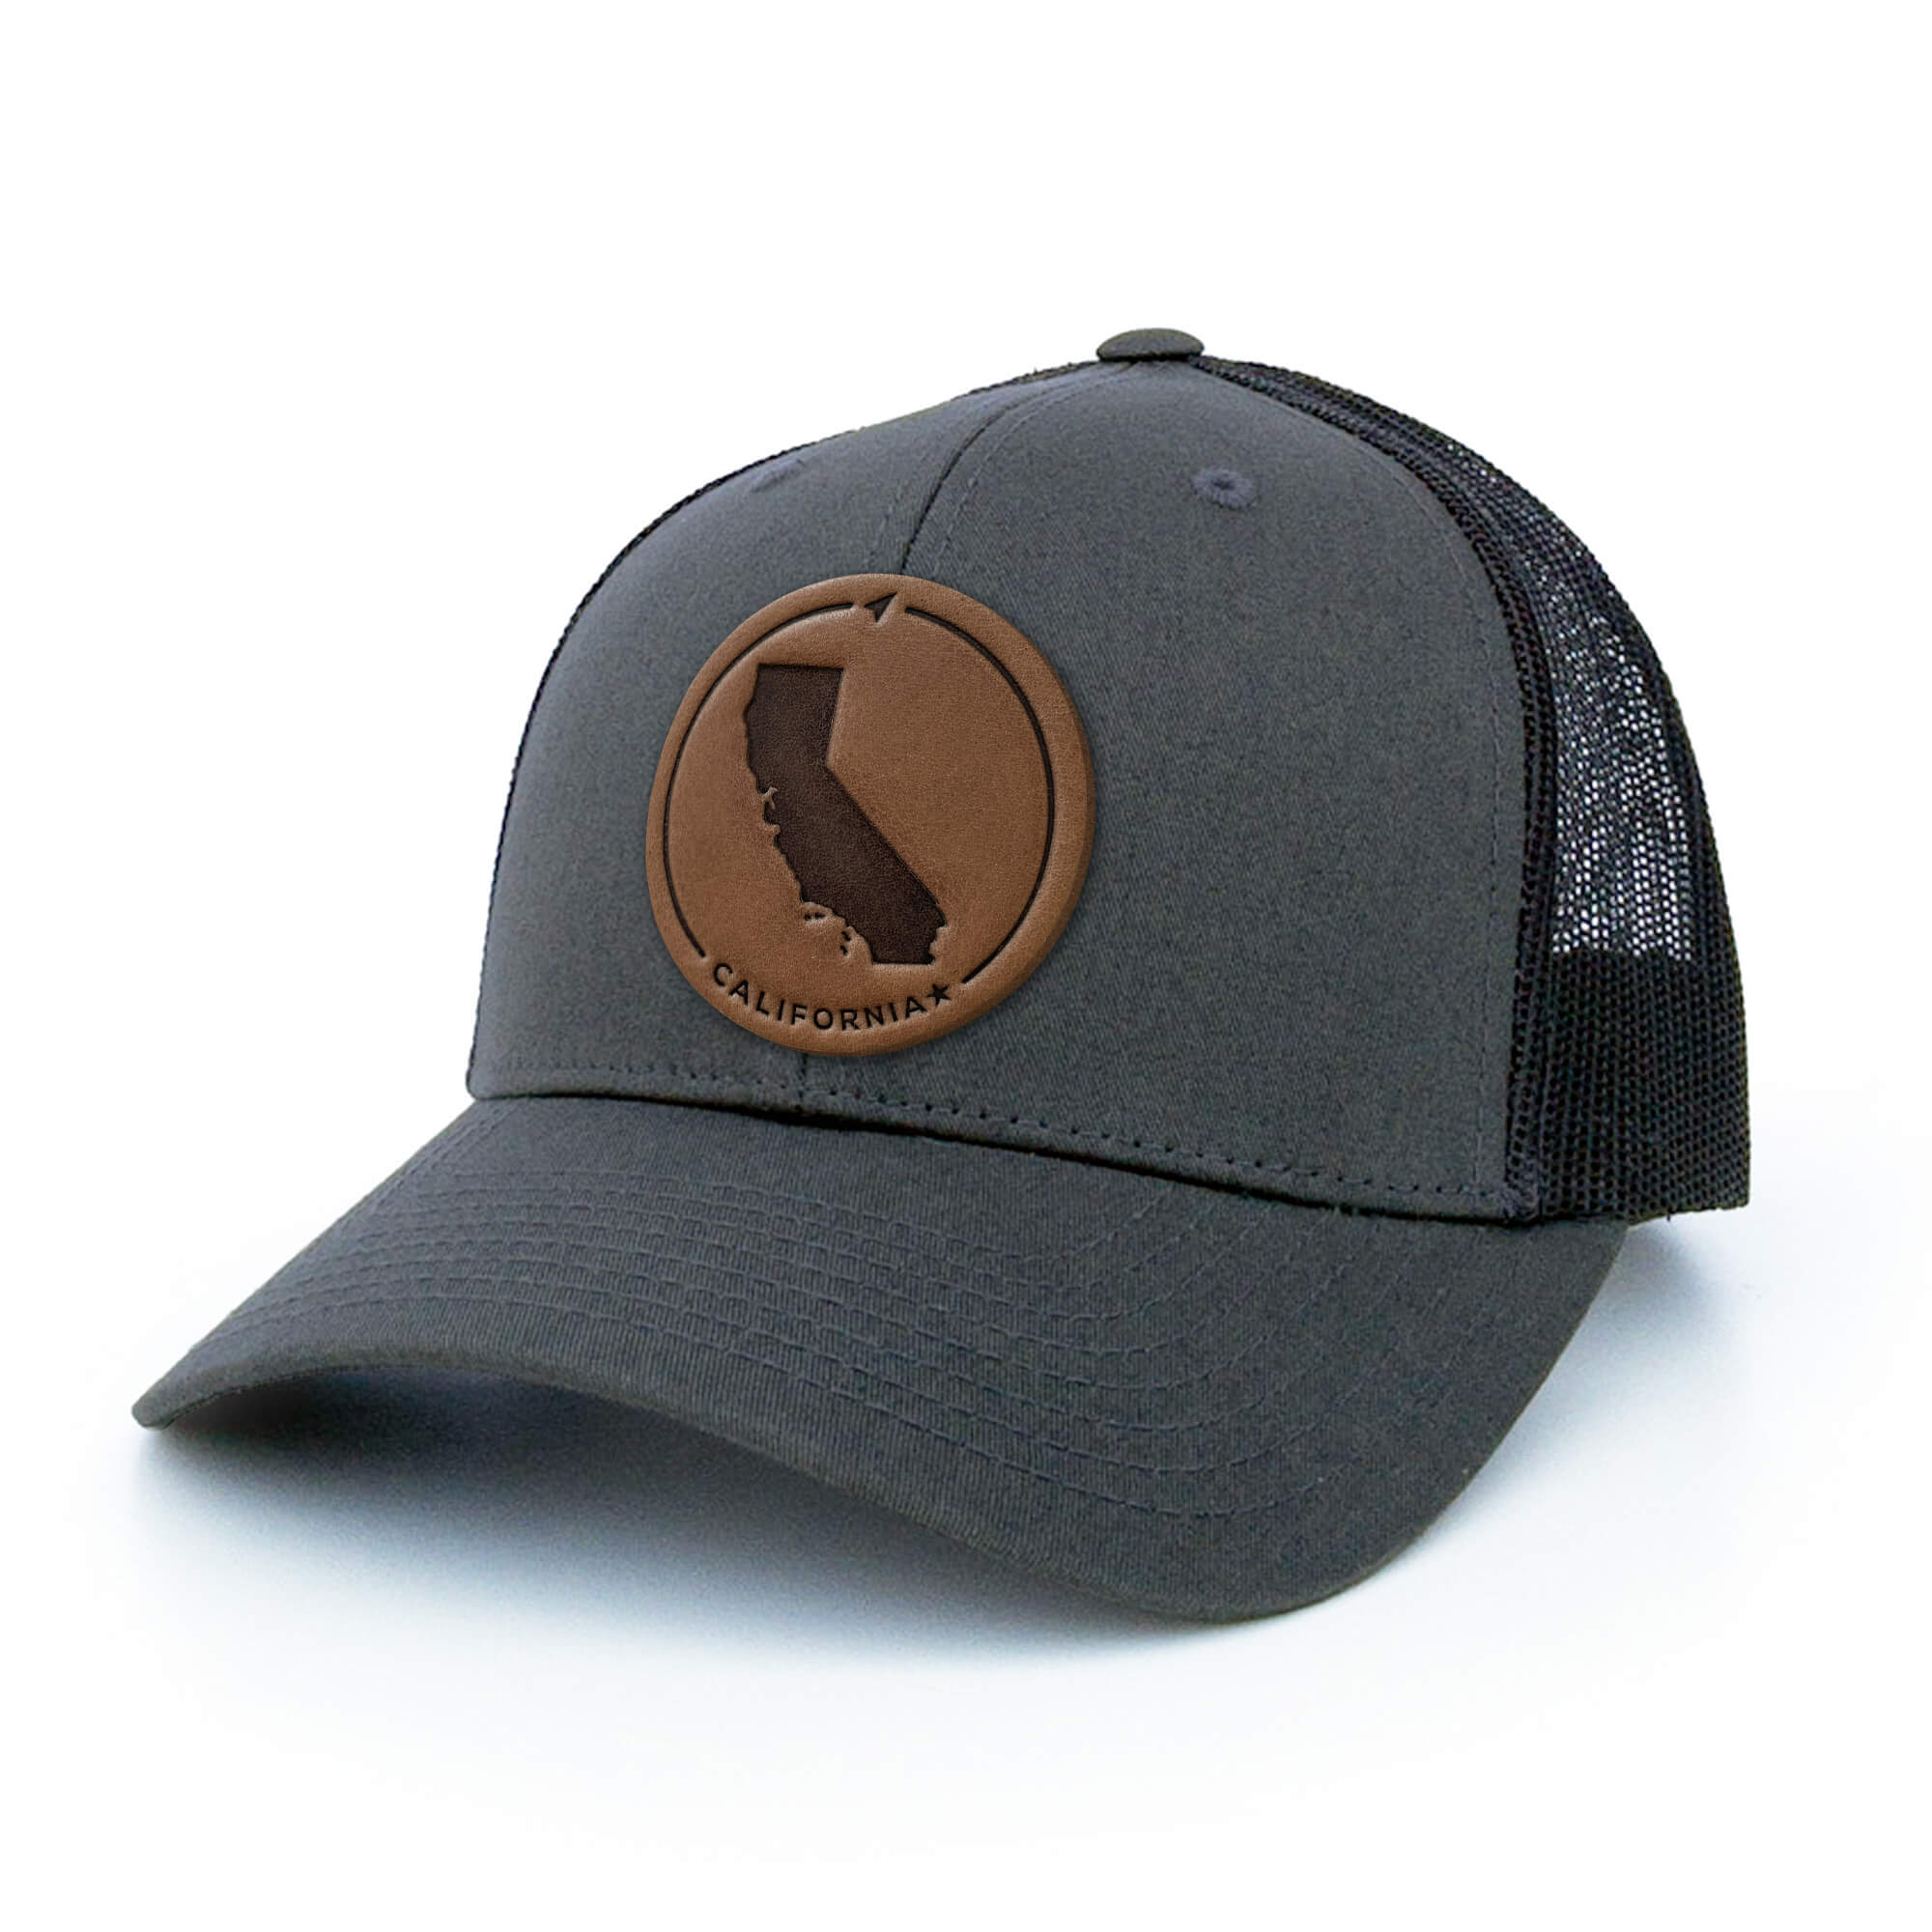 Charcoal trucker hat with full-grain leather patch of California | BLACK-003-011, CHARC-003-011, NAVY-003-011, HGREY-003-011, MOSS-003-011, BROWN-003-011